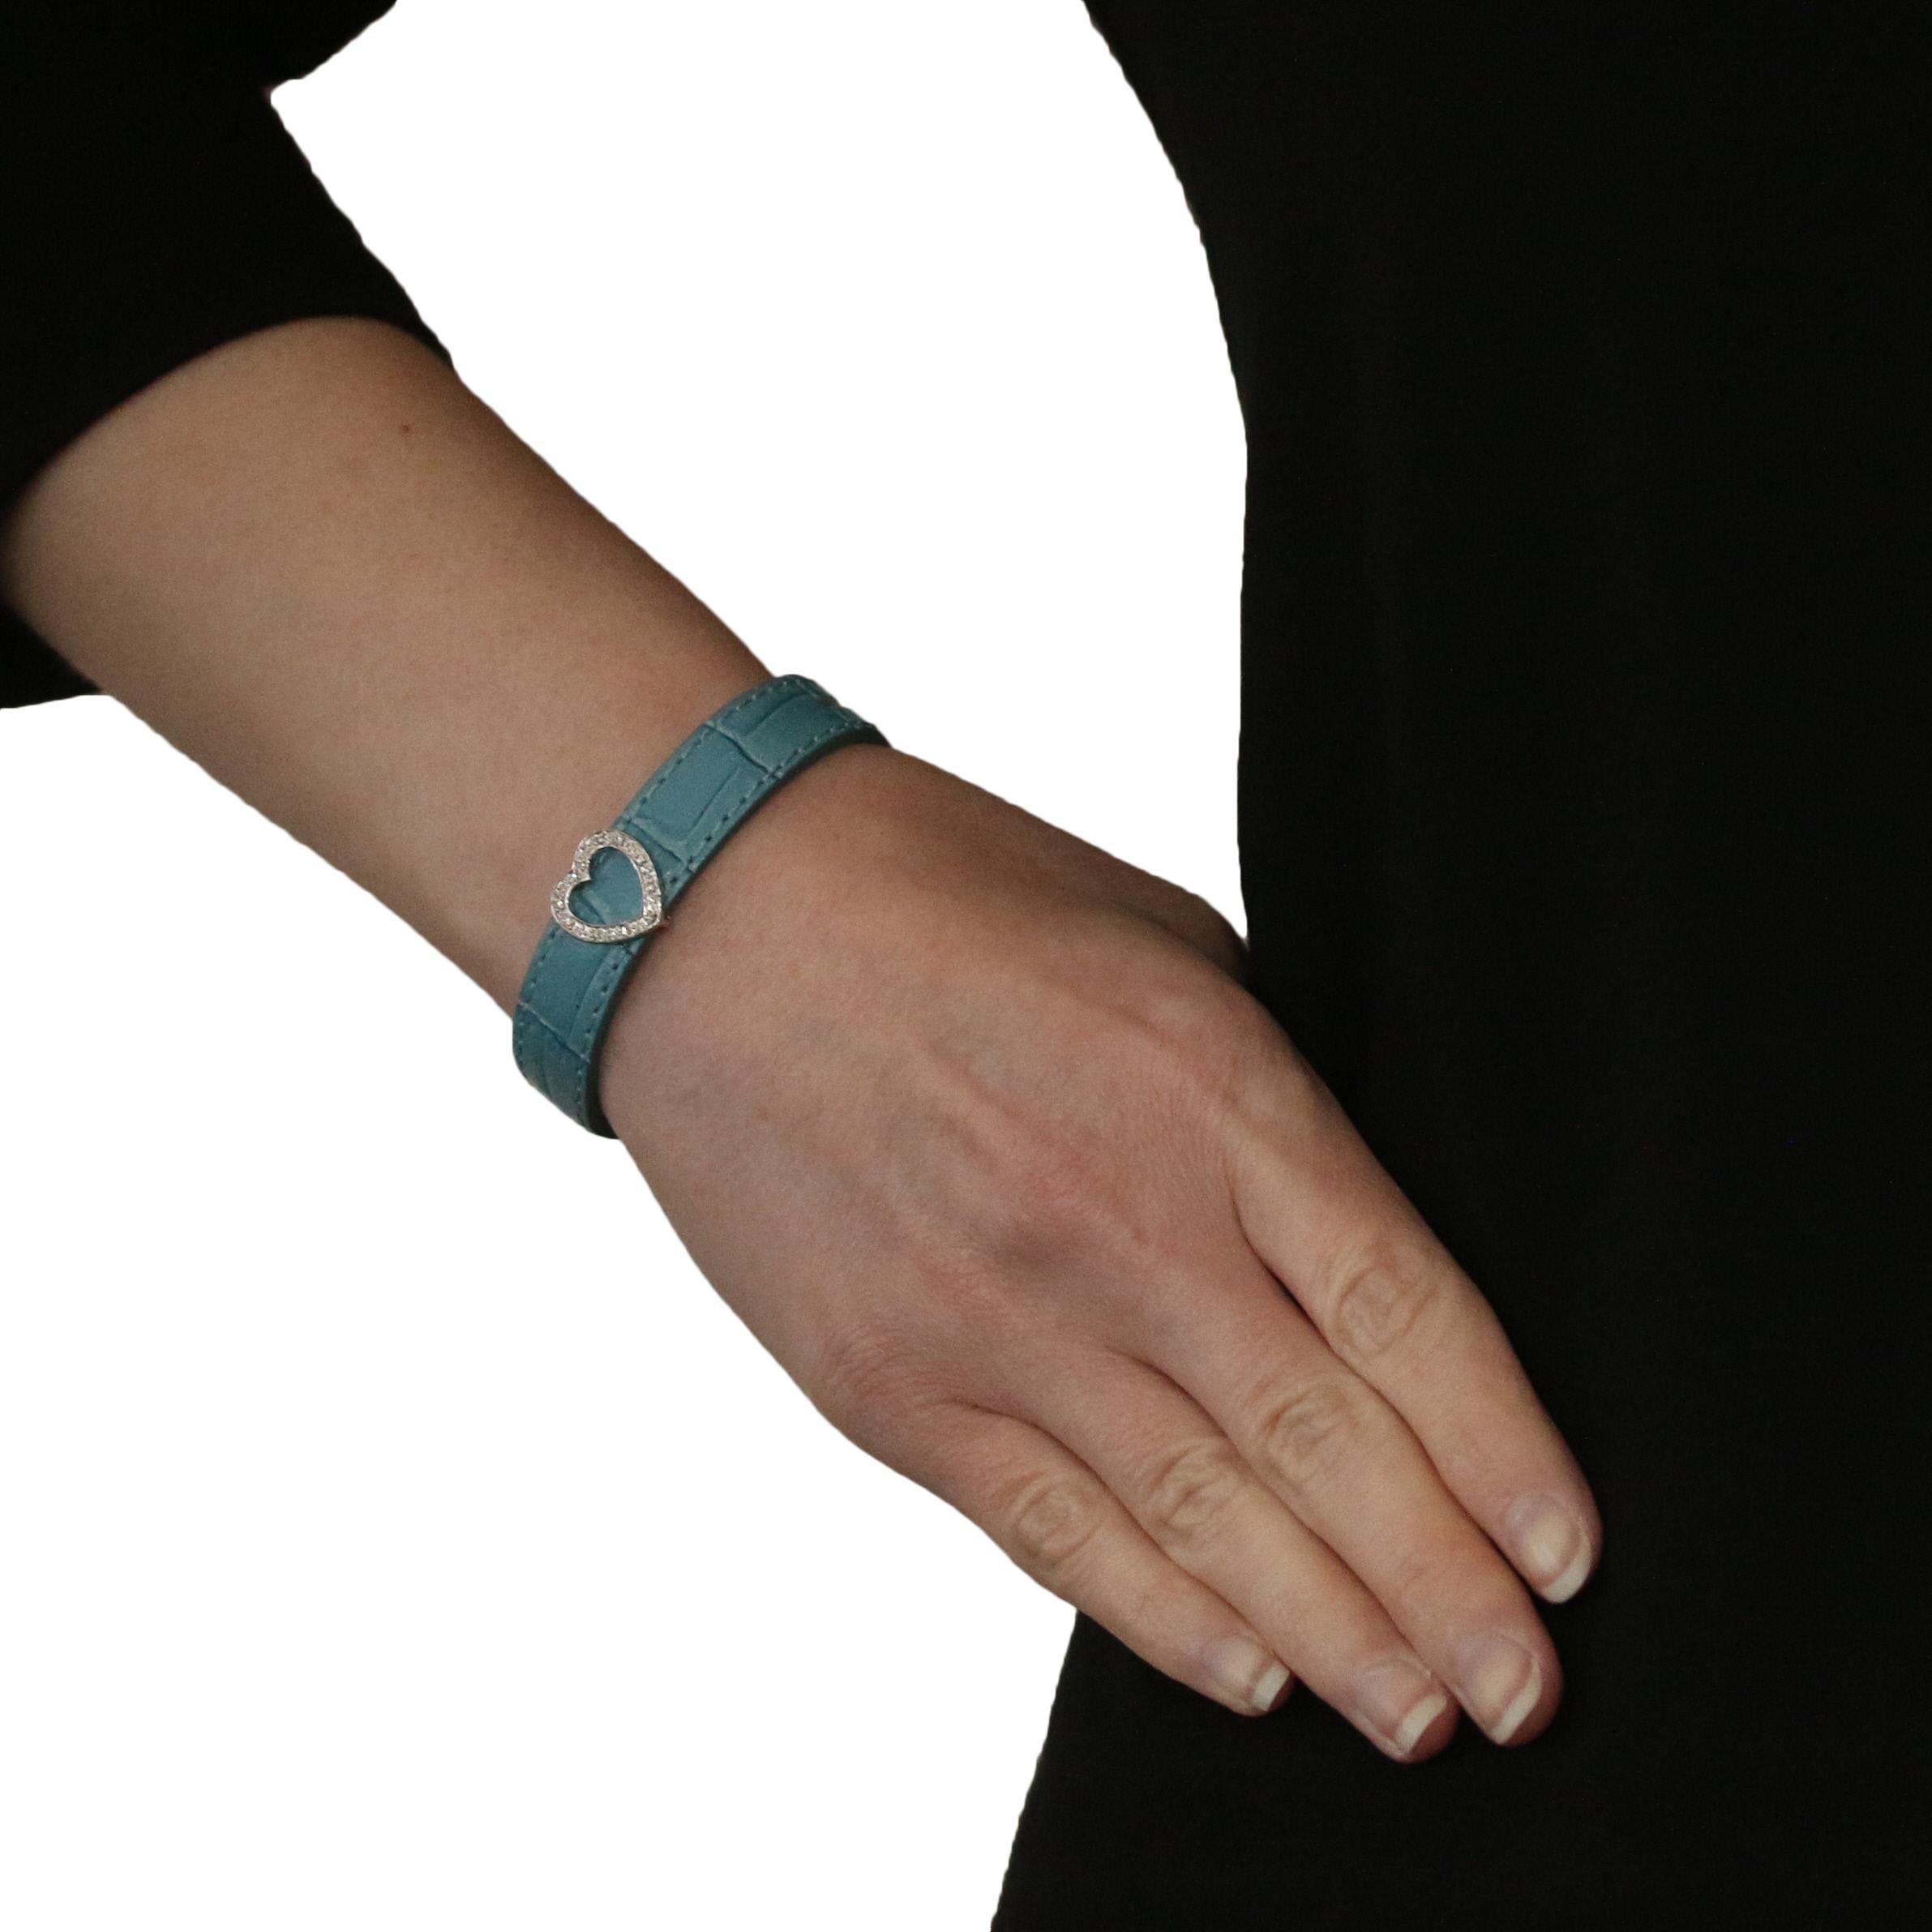 Brand: Effy

Metal Content: Guaranteed 14k Gold as stamped

Stone Information:
Natural Diamonds  
Clarity: VS1
Color: G
Cut: Round Brilliant 
Total Carats: 0.06ctw 

Material Information:
Genuine Leather
Color: Turquoise

Style: Leather Band